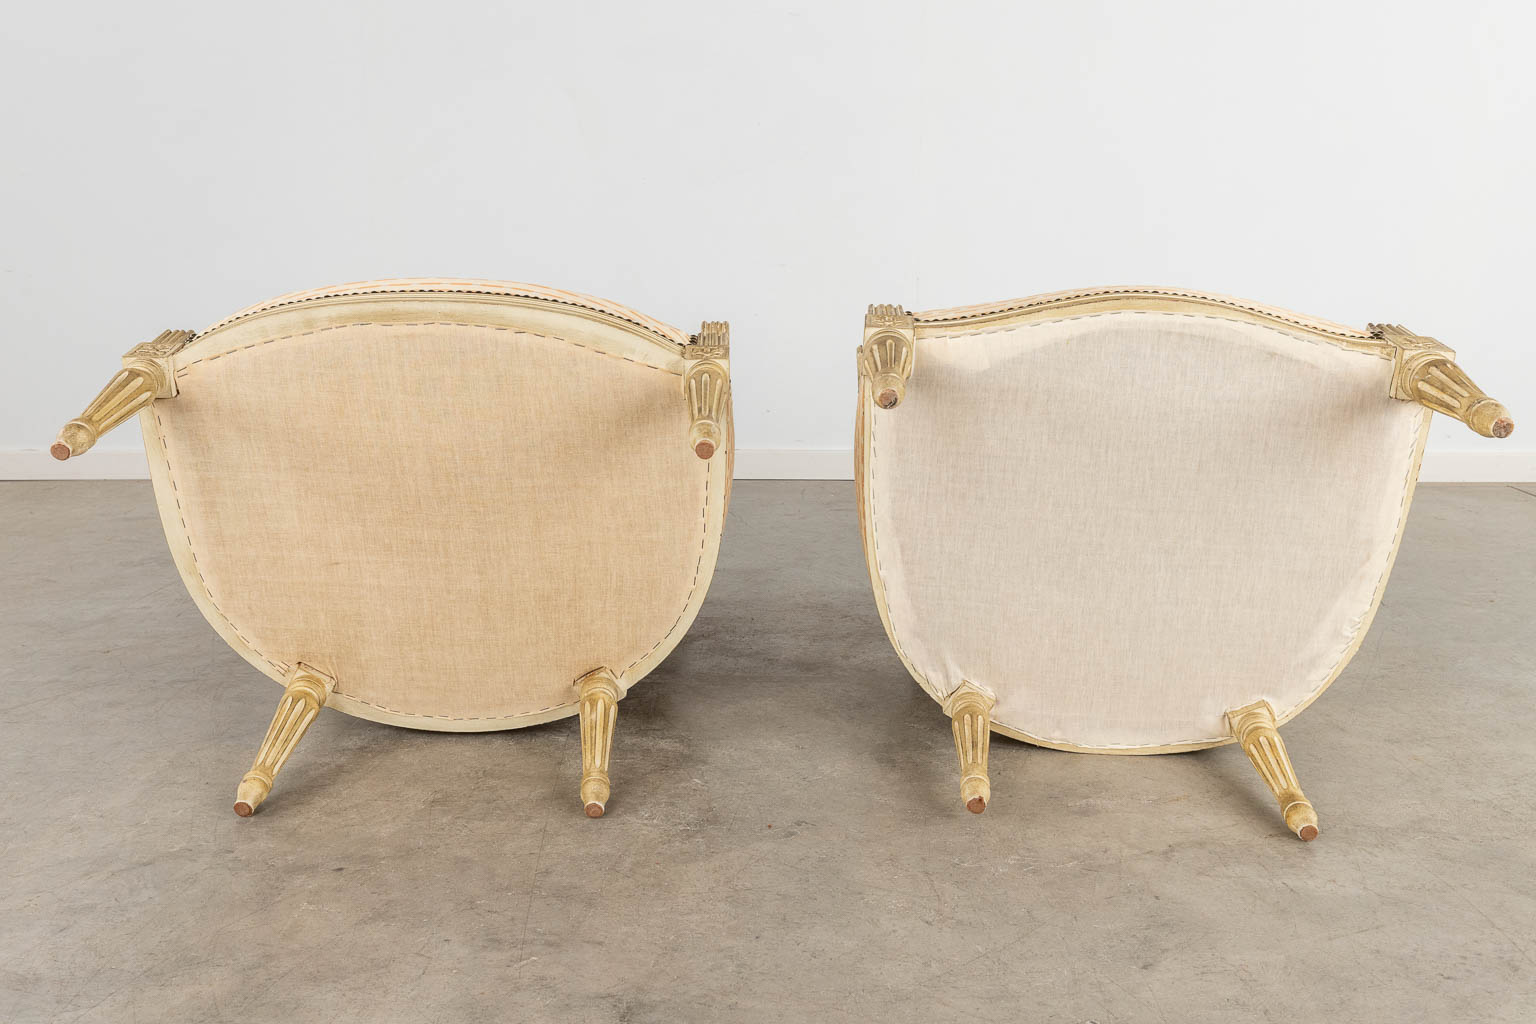 A pair of armchairs, sculptured wood with fabric in Louis XVI style. (D:64 x W:66 x H:92 cm)